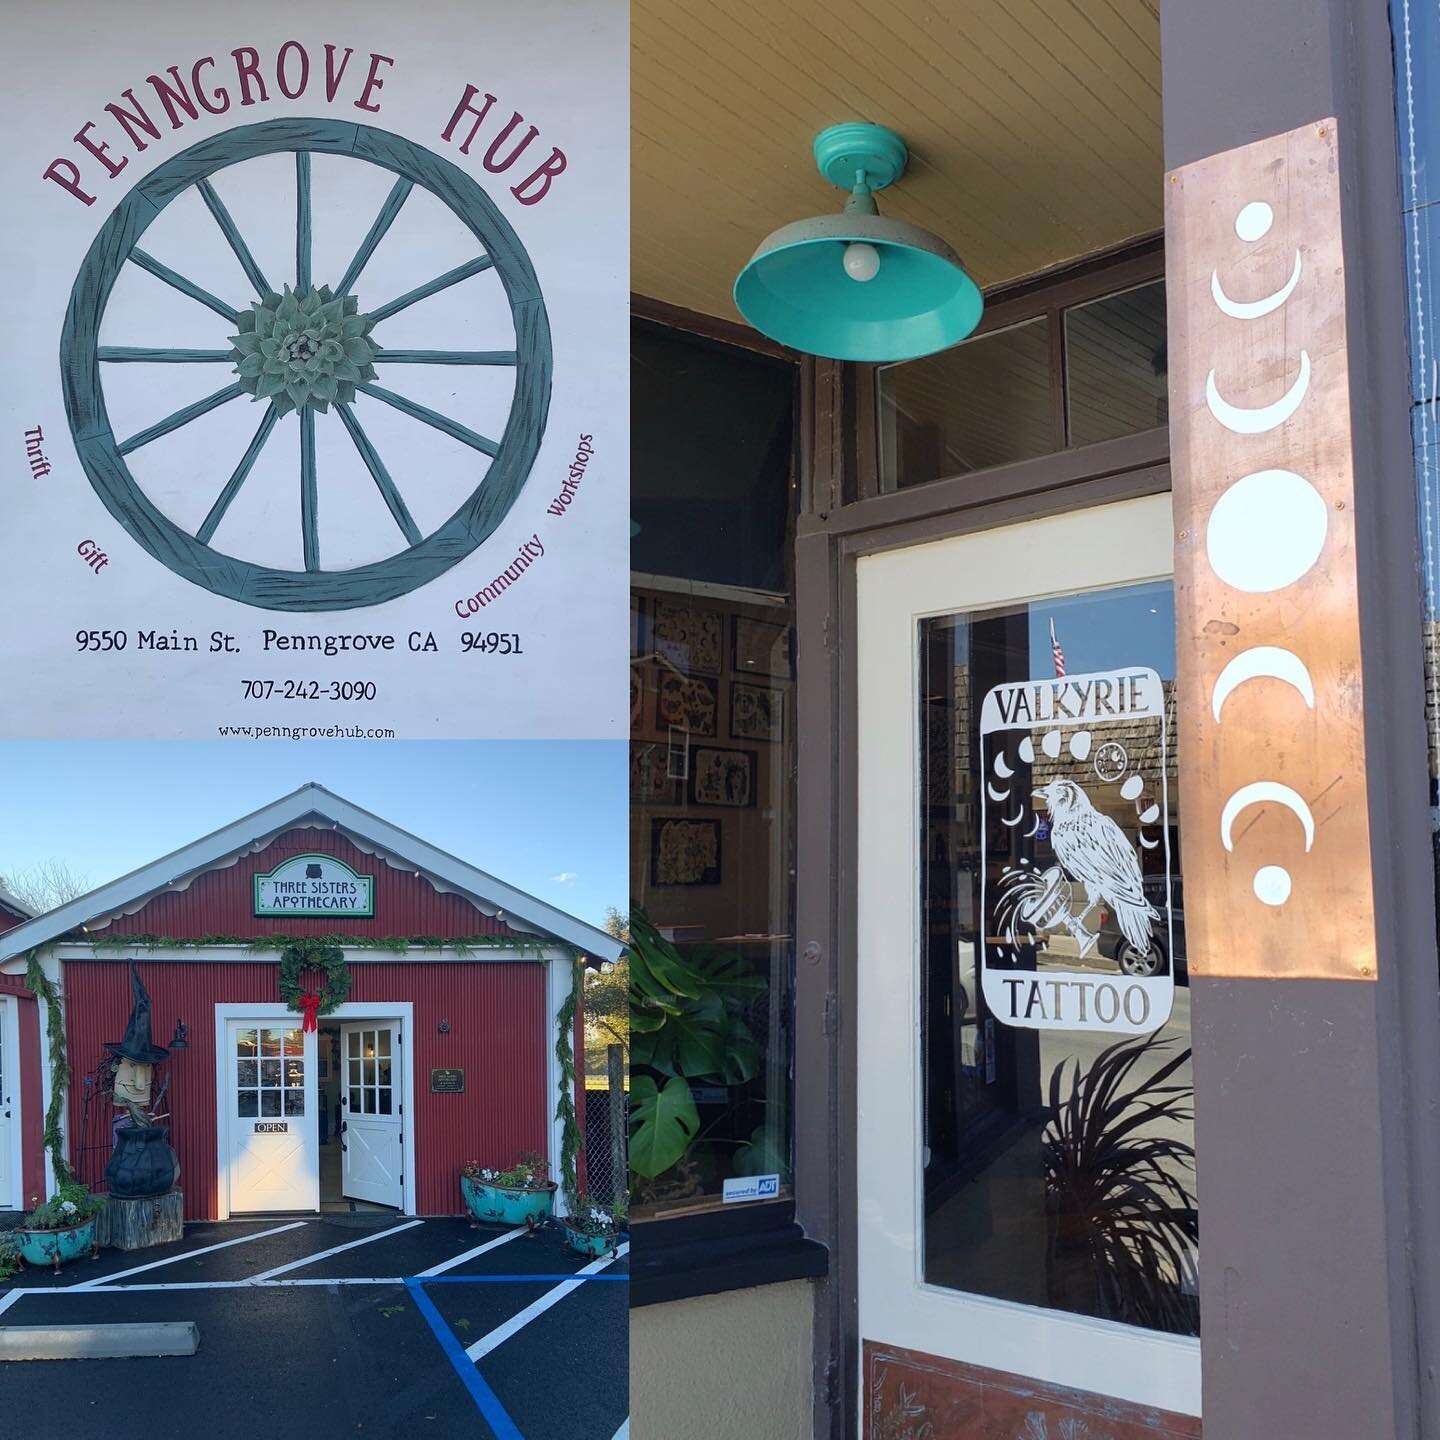 Our last three Penngrove merchants are home to the unusual and unexpected.
Make sure to check out our posts on @penngrovehub , @valkyrie_tattooing and @soapcauldron